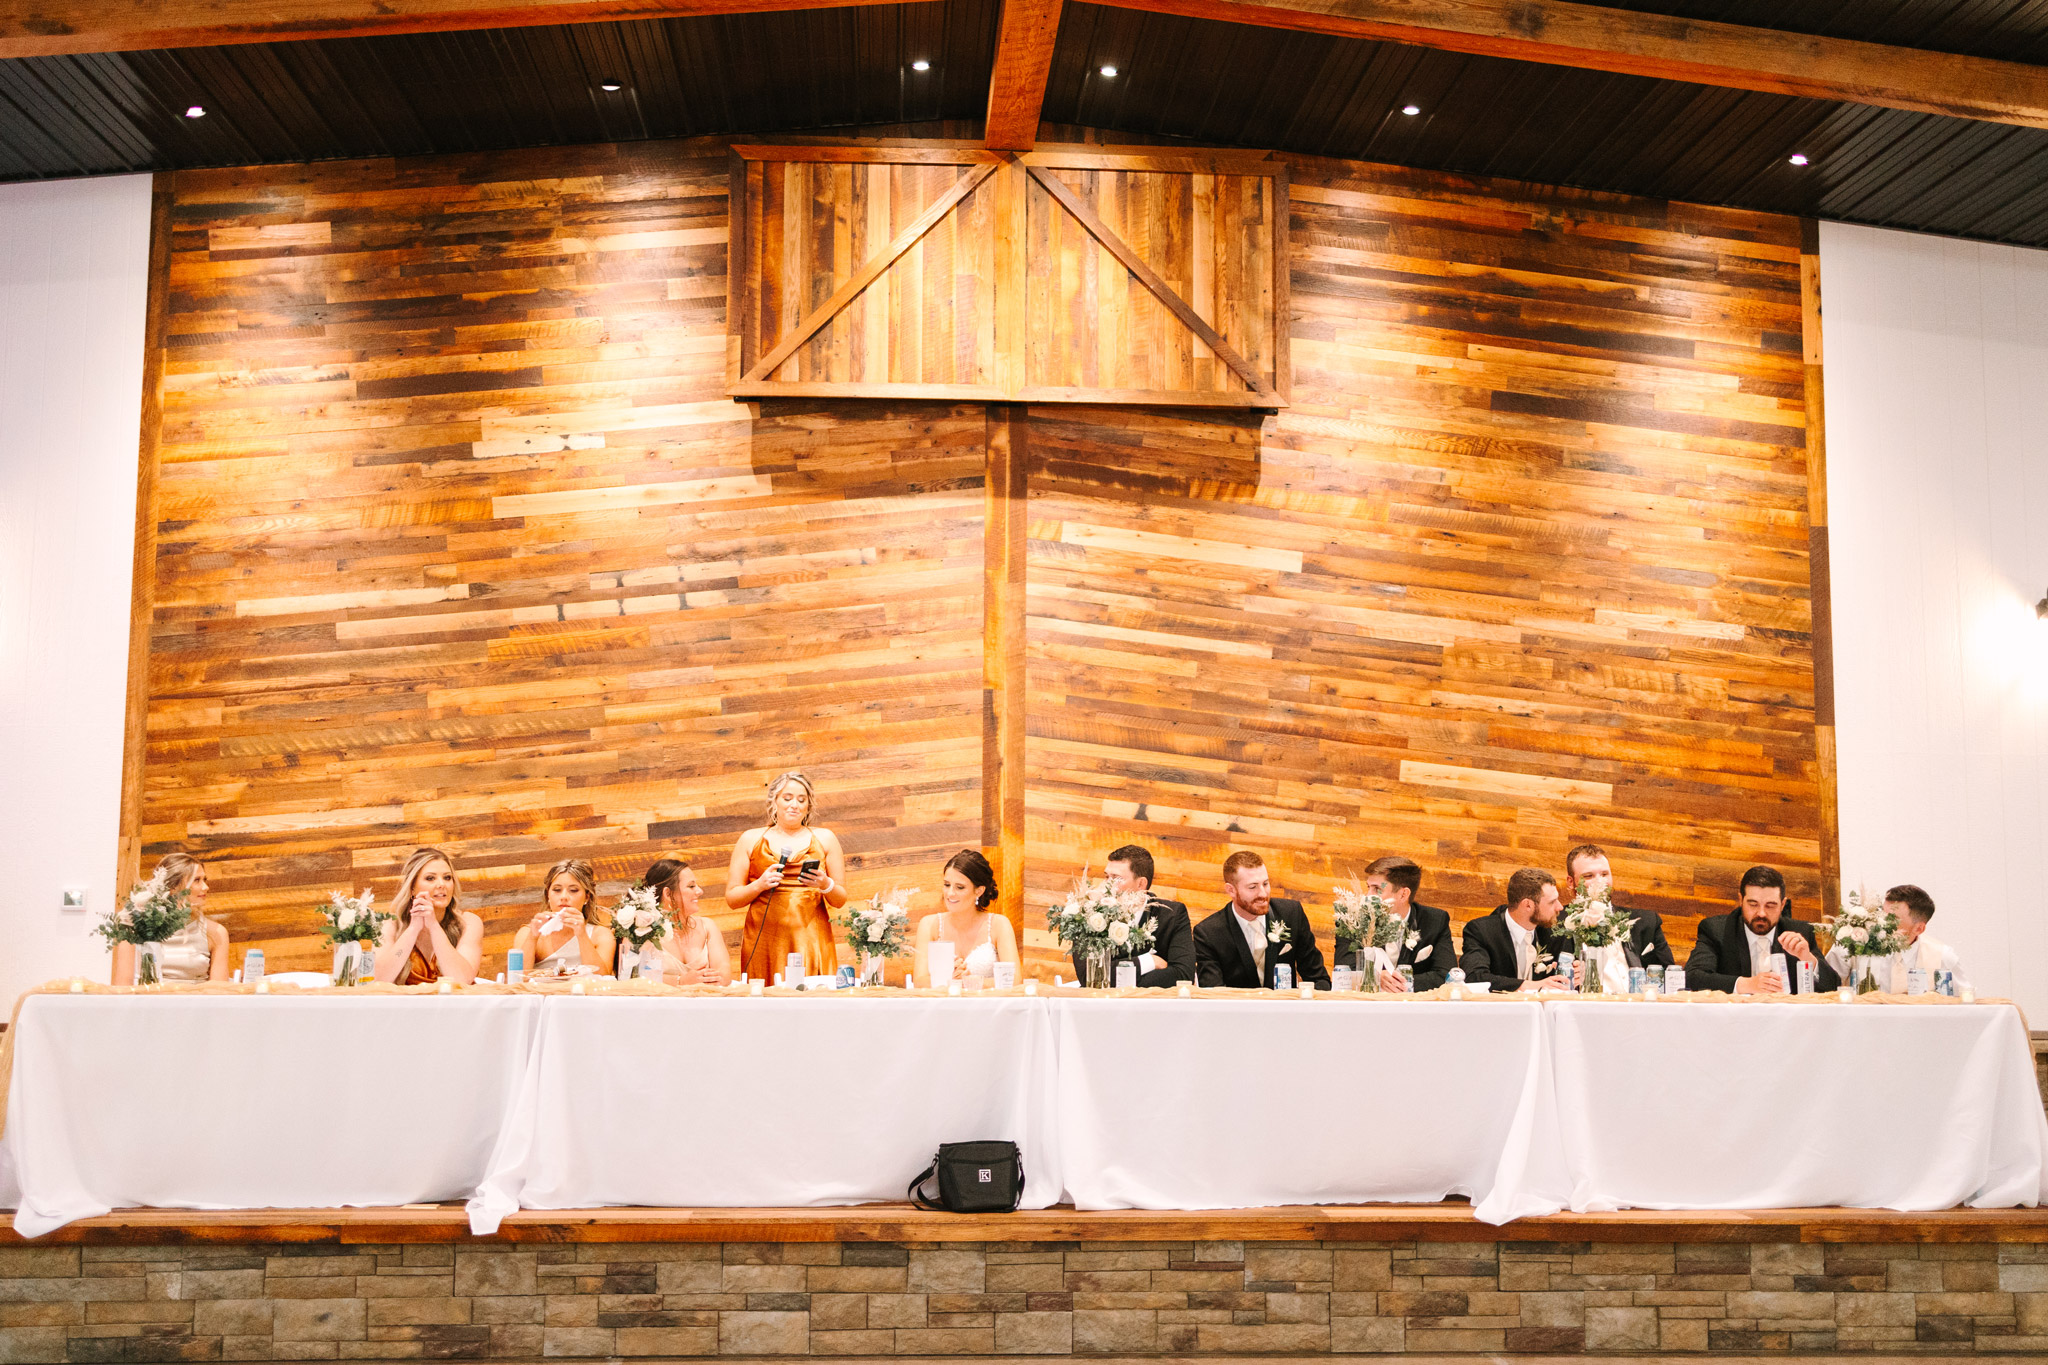 The 30 ft. stage at The VeNue Event Space with a large wedding party sitting a long, white table